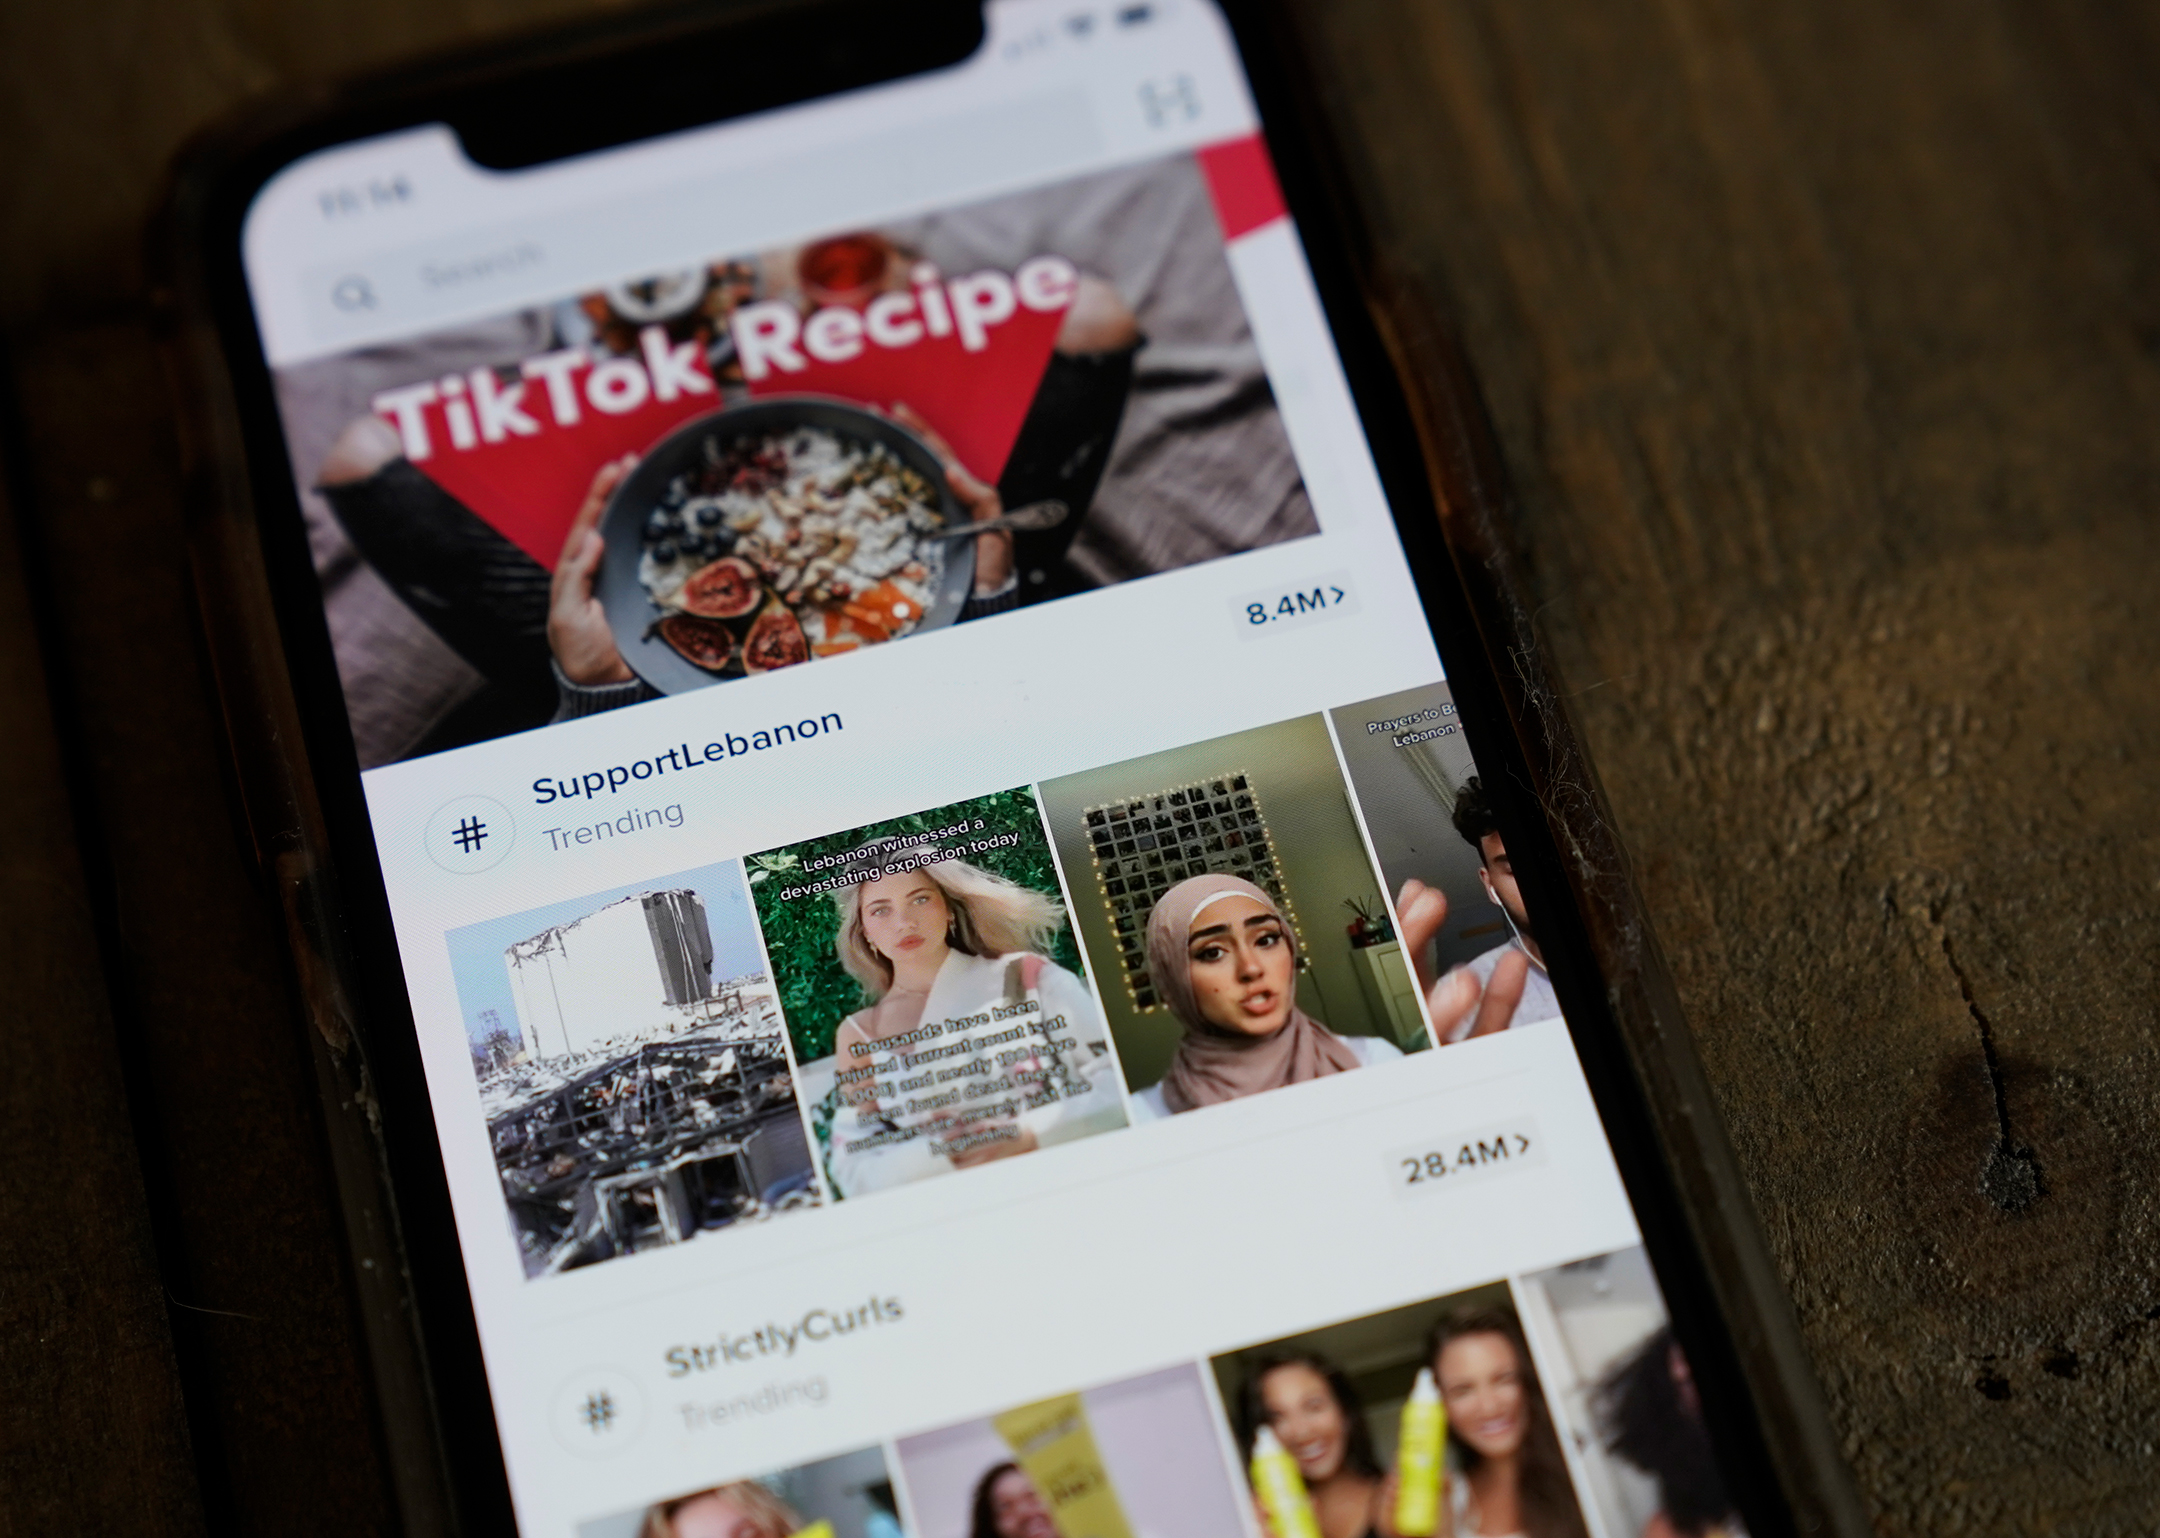 Photo of an iPhone screen showing the app homepage of TikTok